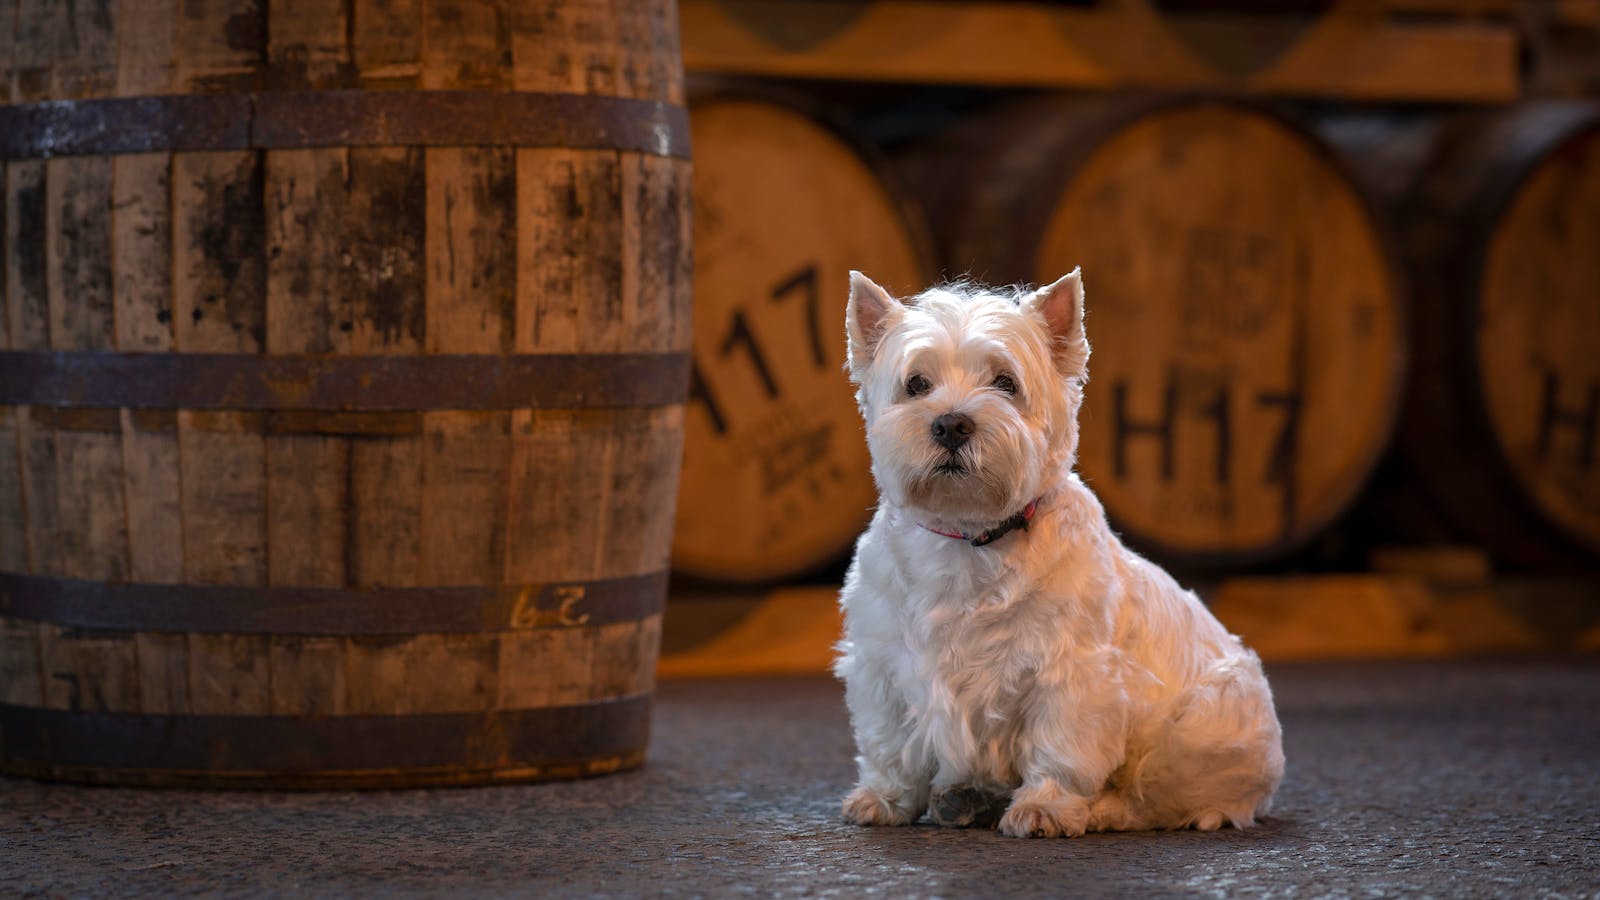 Distillery Mascot Angus the Whisky Dog